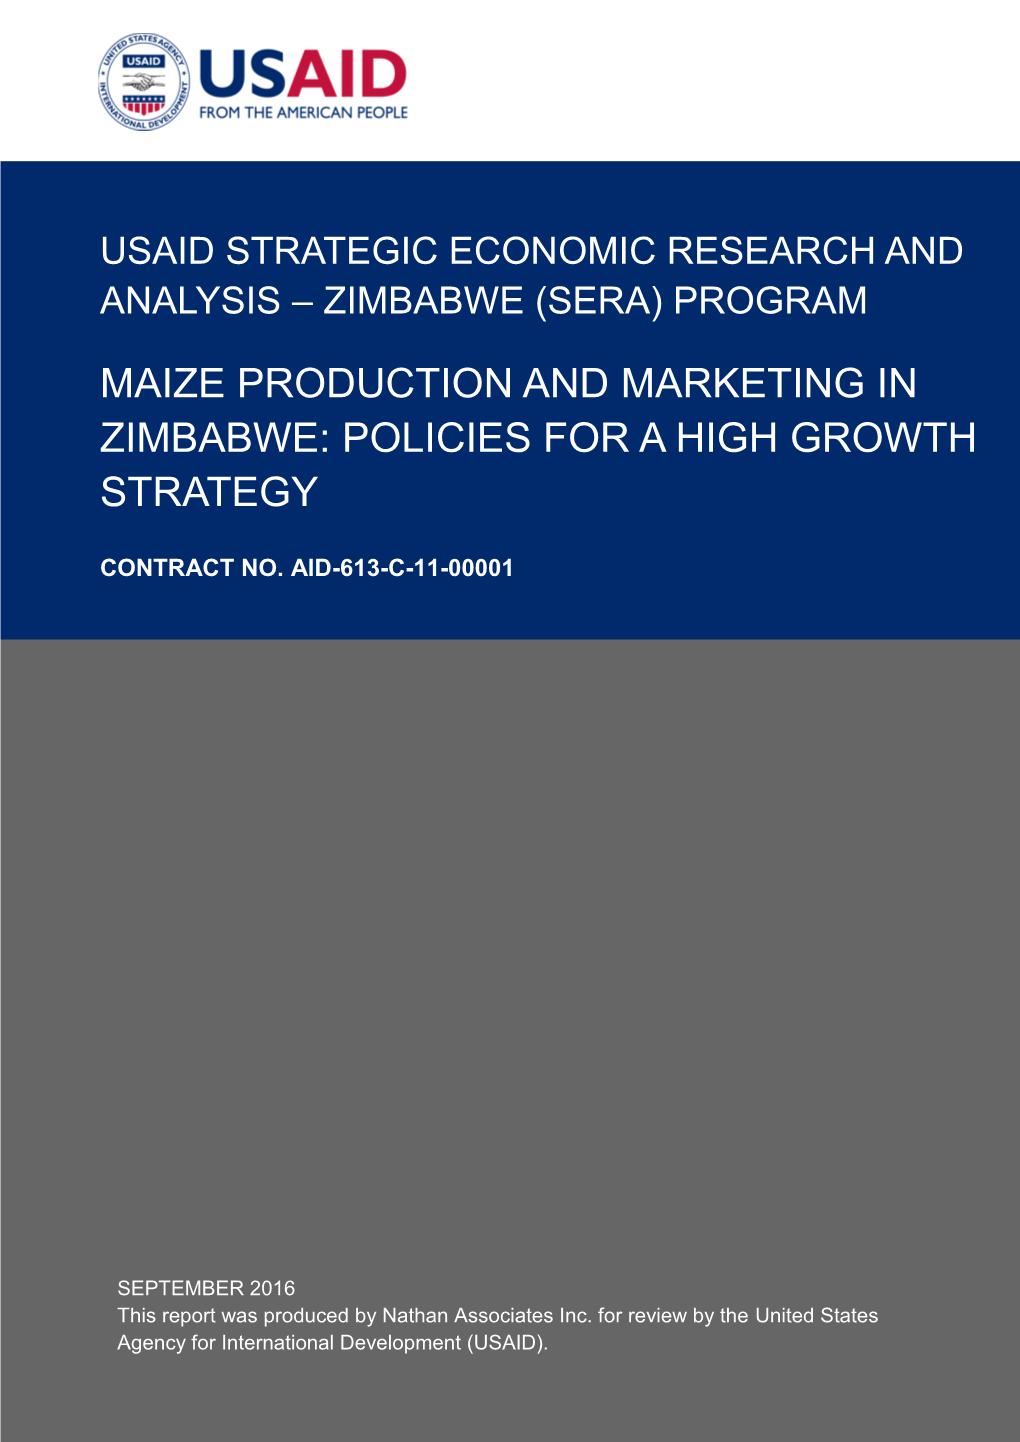 Maize Production and Marketing in Zimbabwe: Policies for a High Growth Strategy